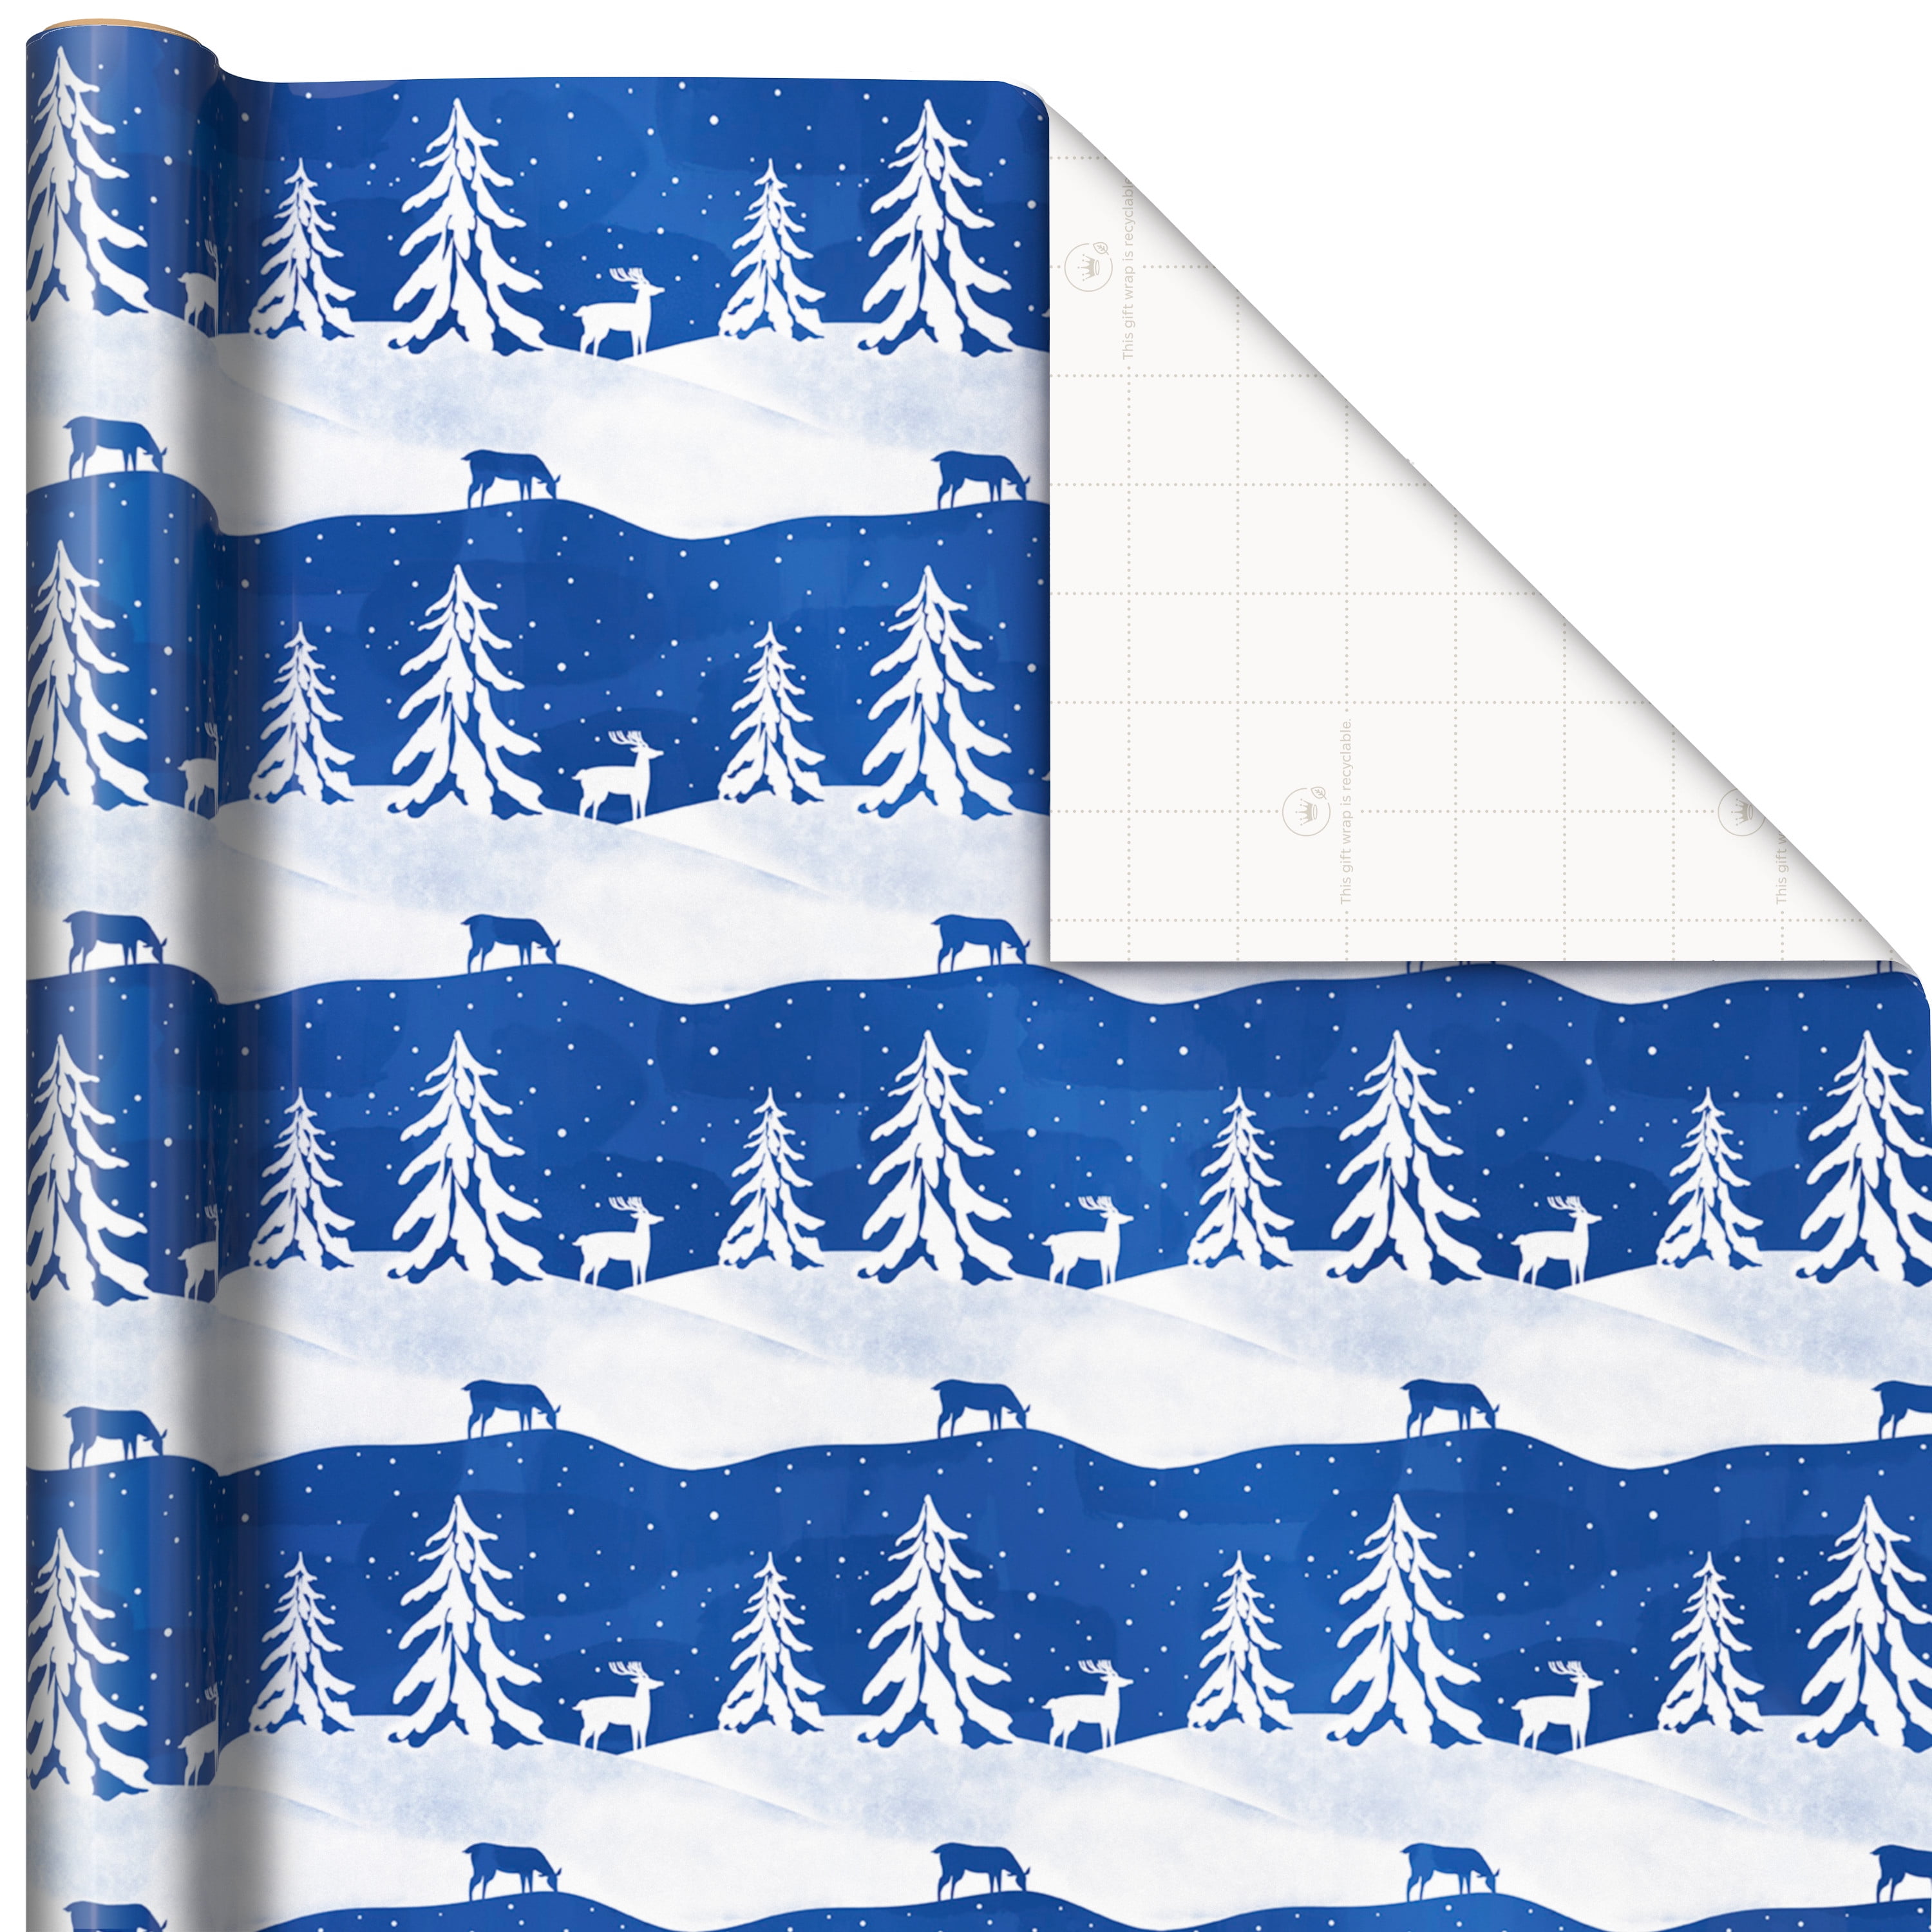  Hallmark Christmas Wrapping Paper Jumbo Rolls with Cut Lines on  Reverse (2 Rolls, 4 Designs: 160 Sq. Ft. Ttl) Black and Gold Trees,  Snowflakes, Plaid for Holidays, Hanukkah, Weddings, Graduations 